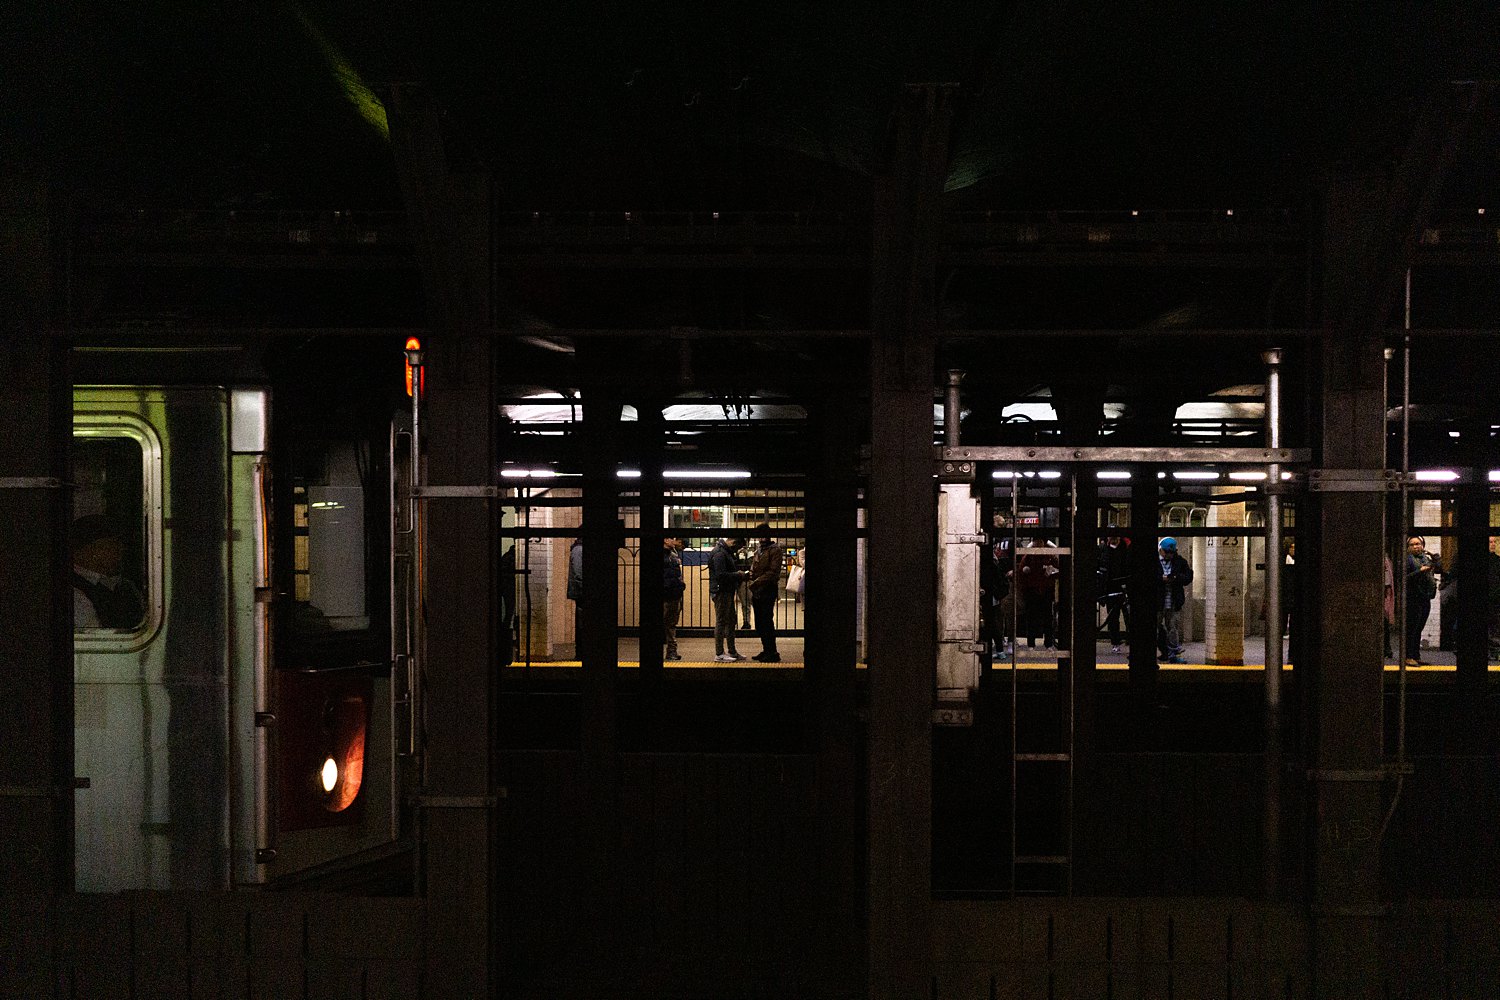 NYC subway platform with people waiting in dark places to visit in New York